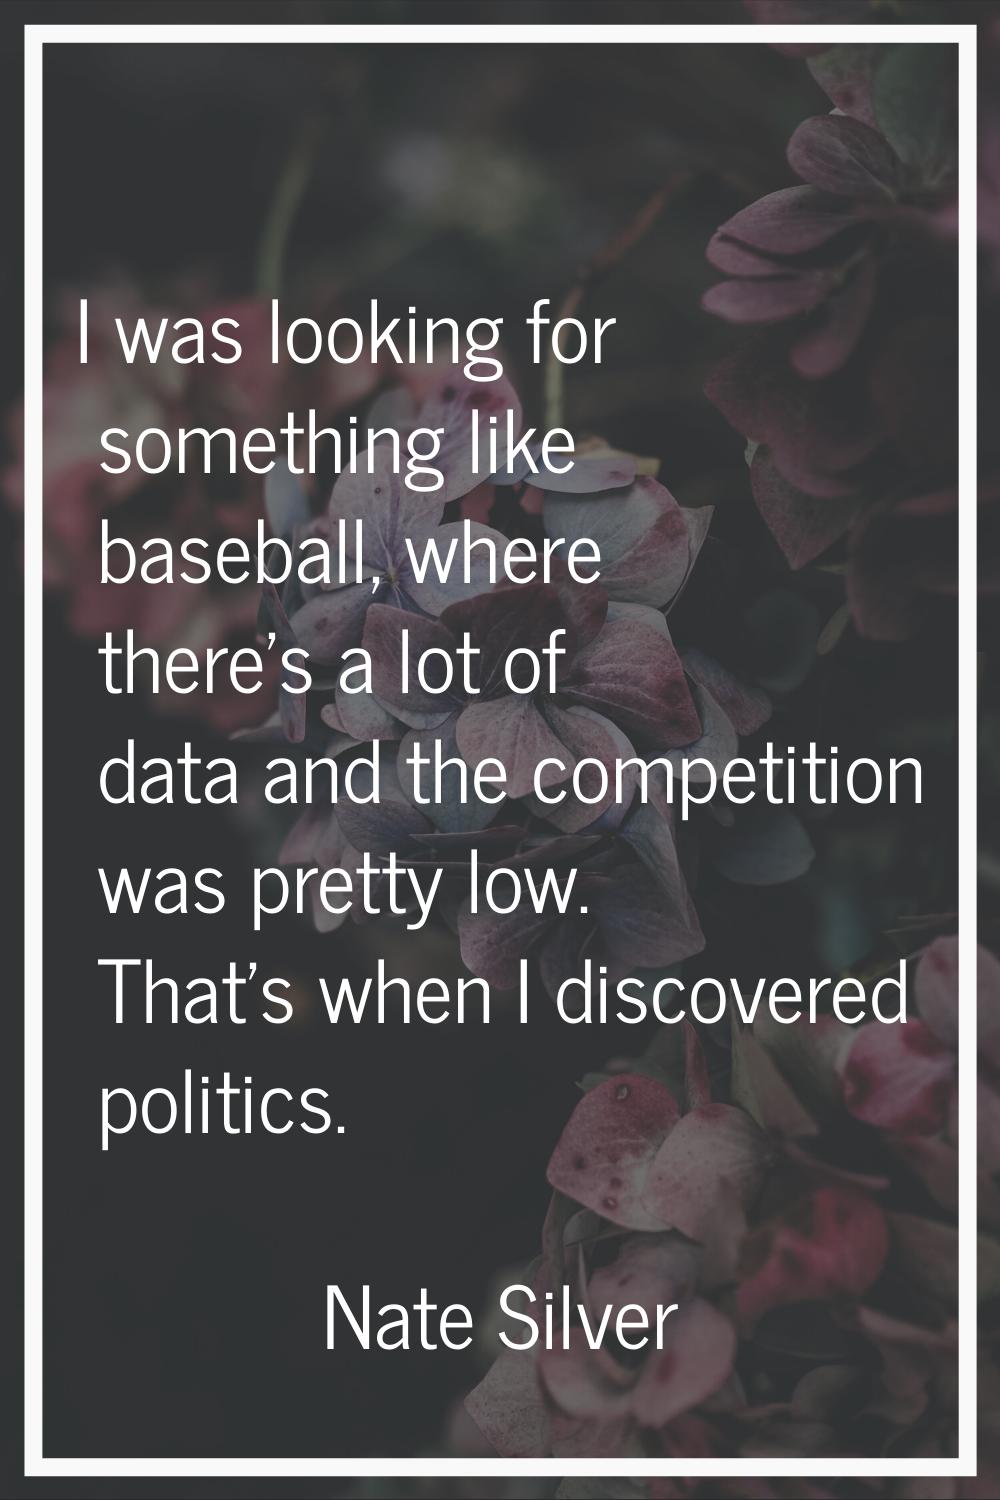 I was looking for something like baseball, where there's a lot of data and the competition was pret